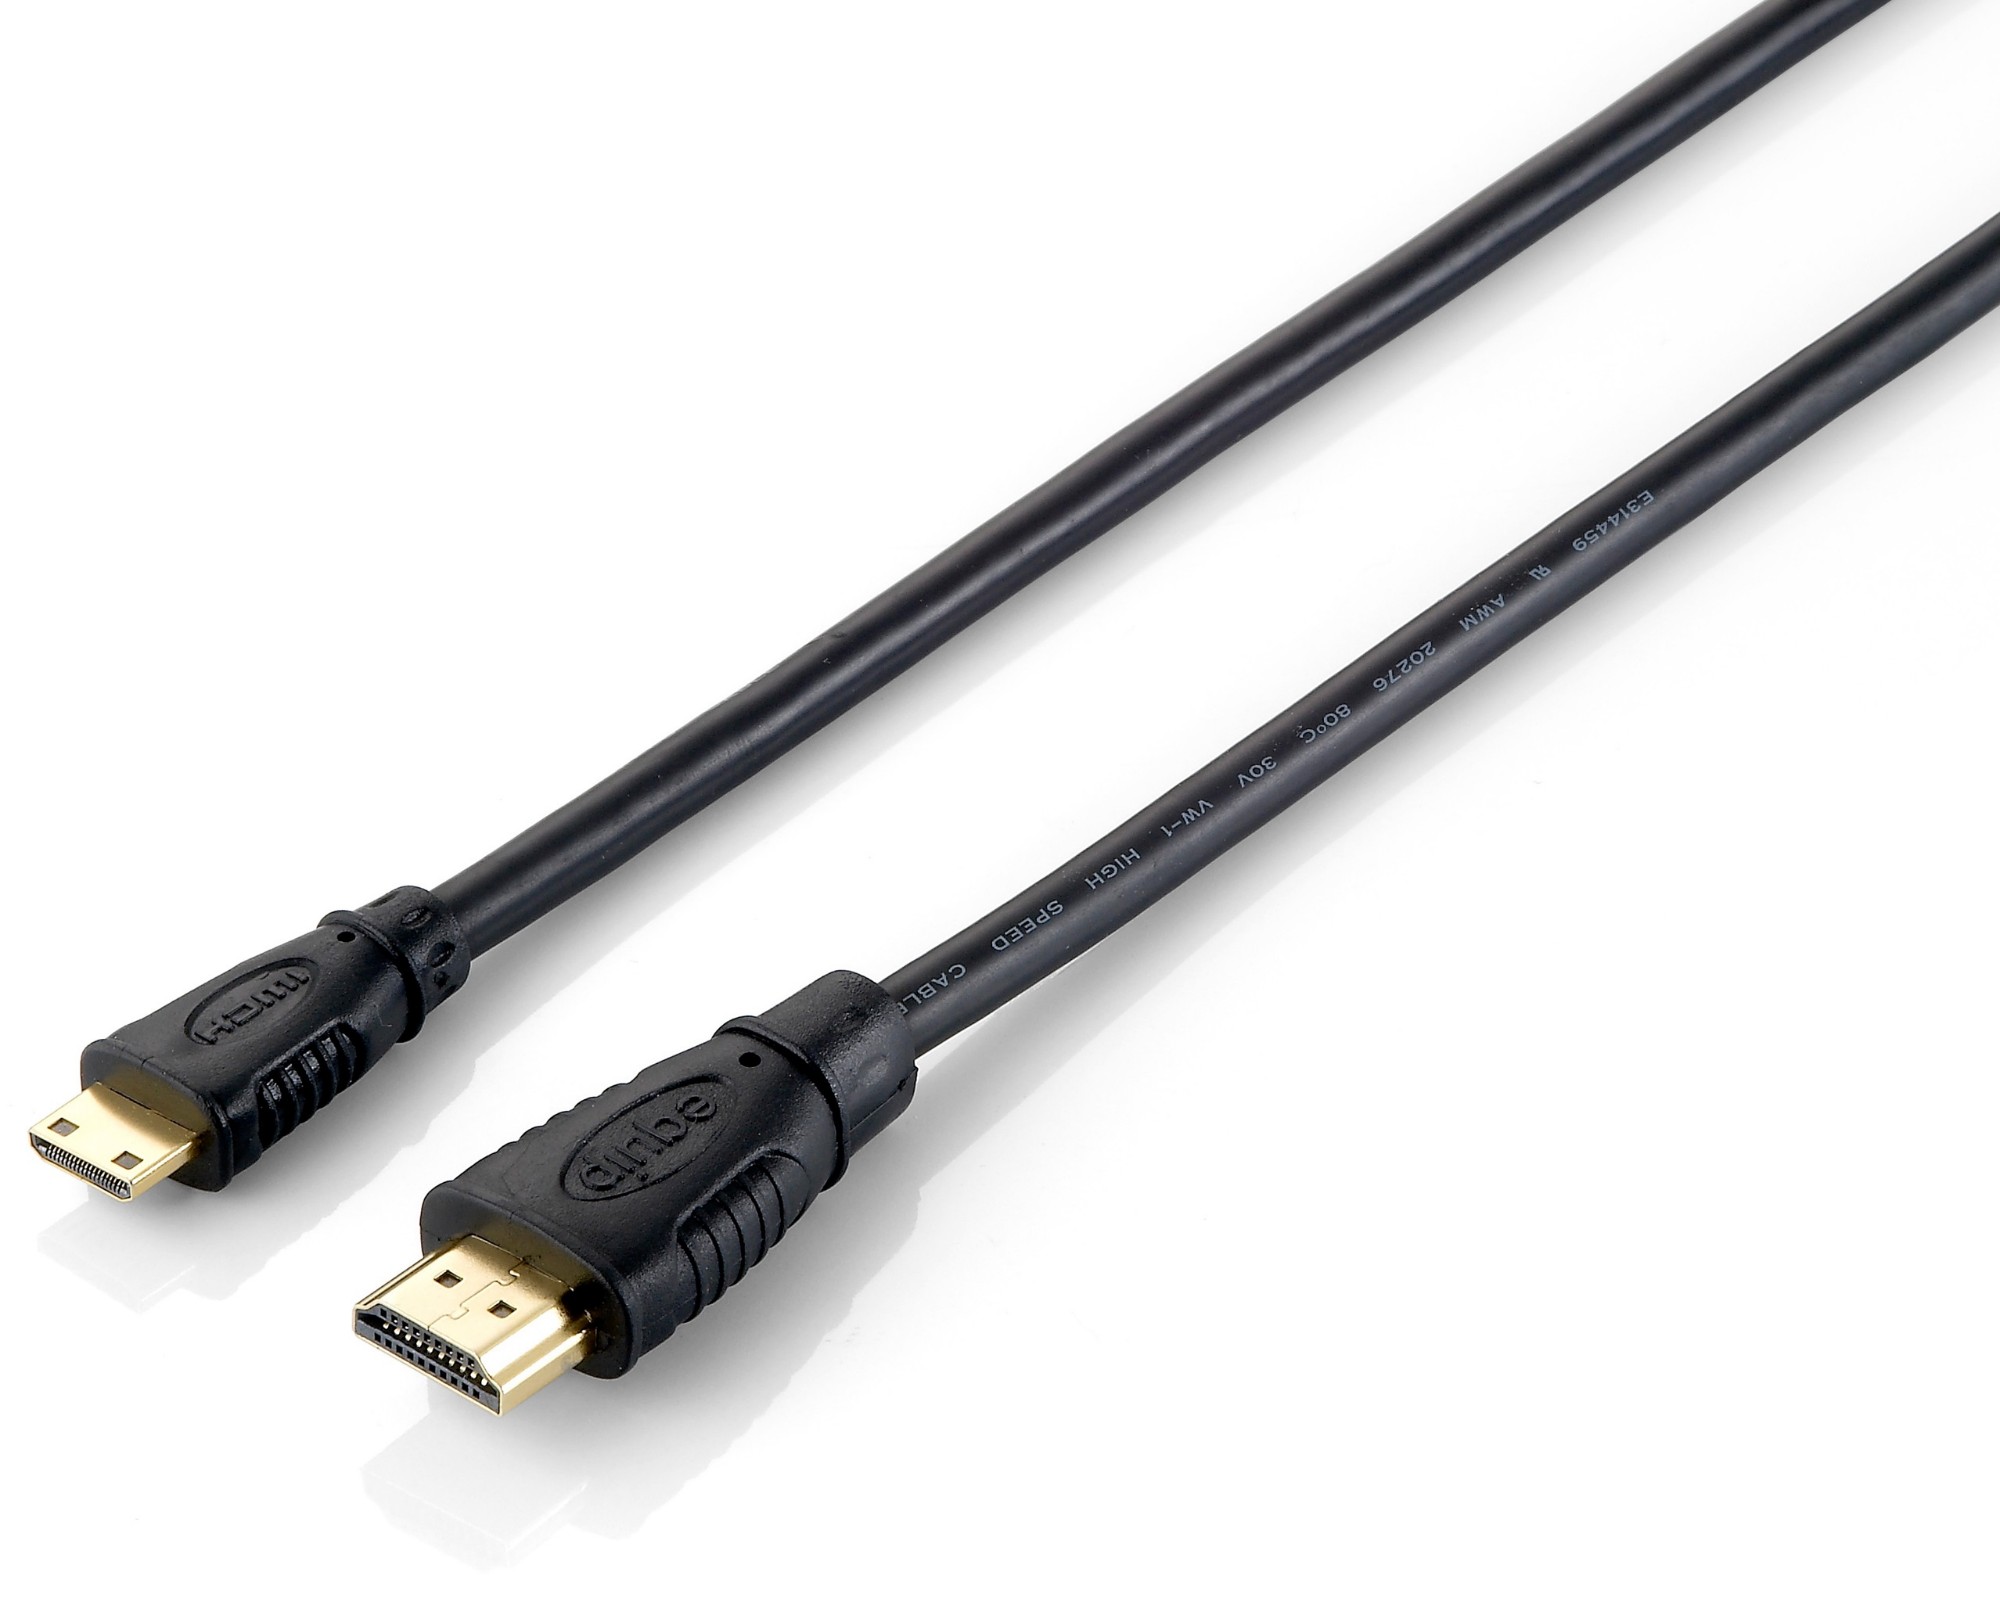 Photos - Cable (video, audio, USB) Equip HDMI to Mini HDMI Cable, 1m 119306 